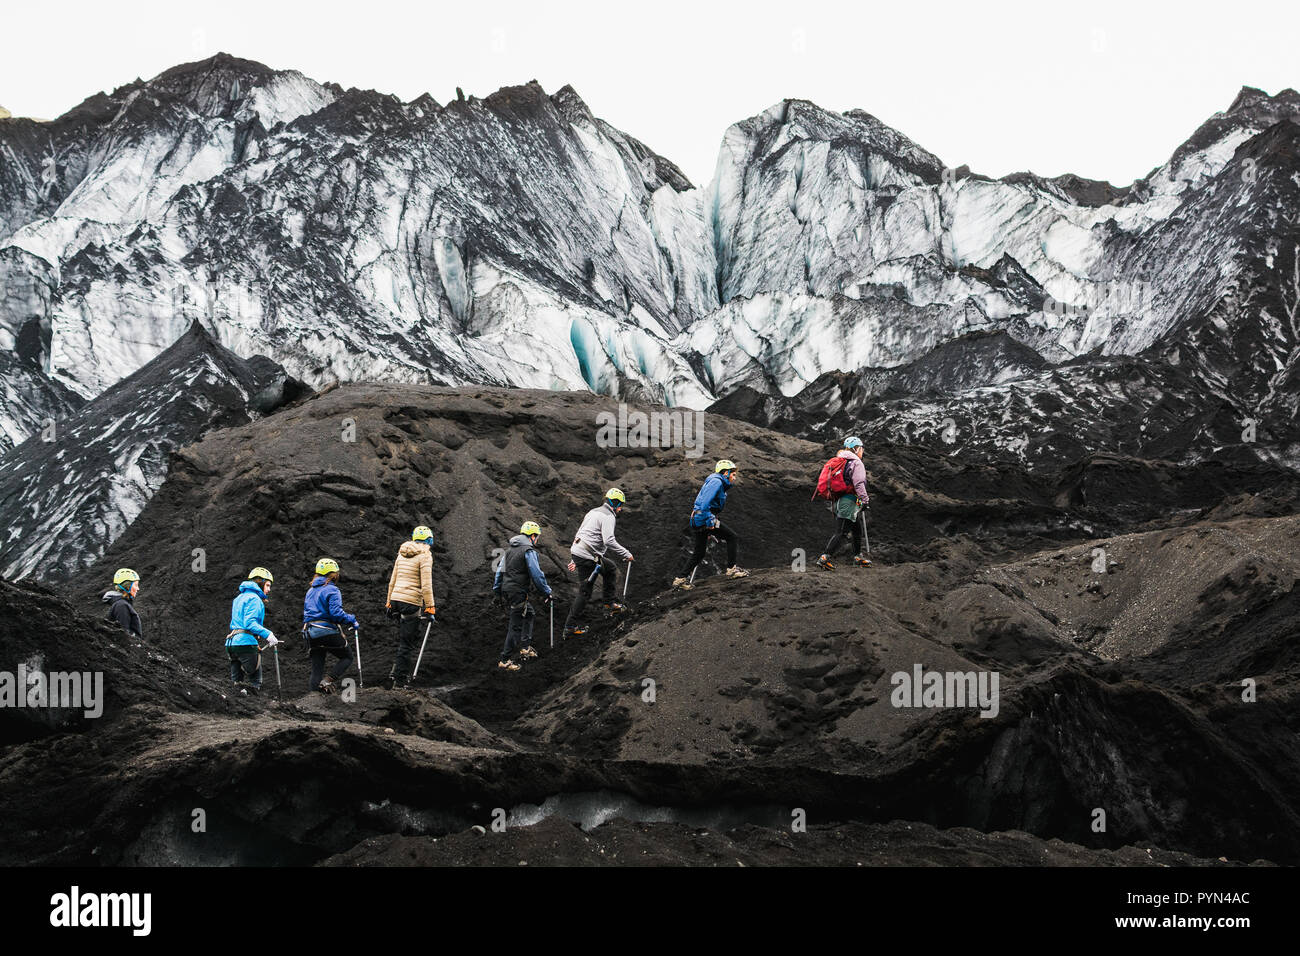 MYRDALSJOKULL, ICELAND - AUGUST 2018: Group of tourists heading to the guided tour on Solheimajokull glacier, Iceland. Stock Photo